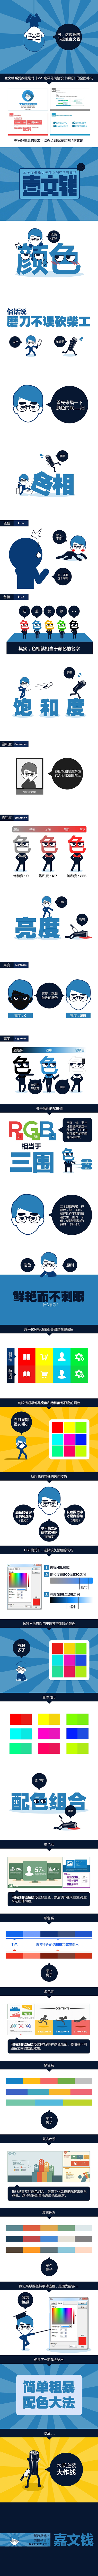 Yiwenqian Comic PPT Flat Style Tutorial—Color